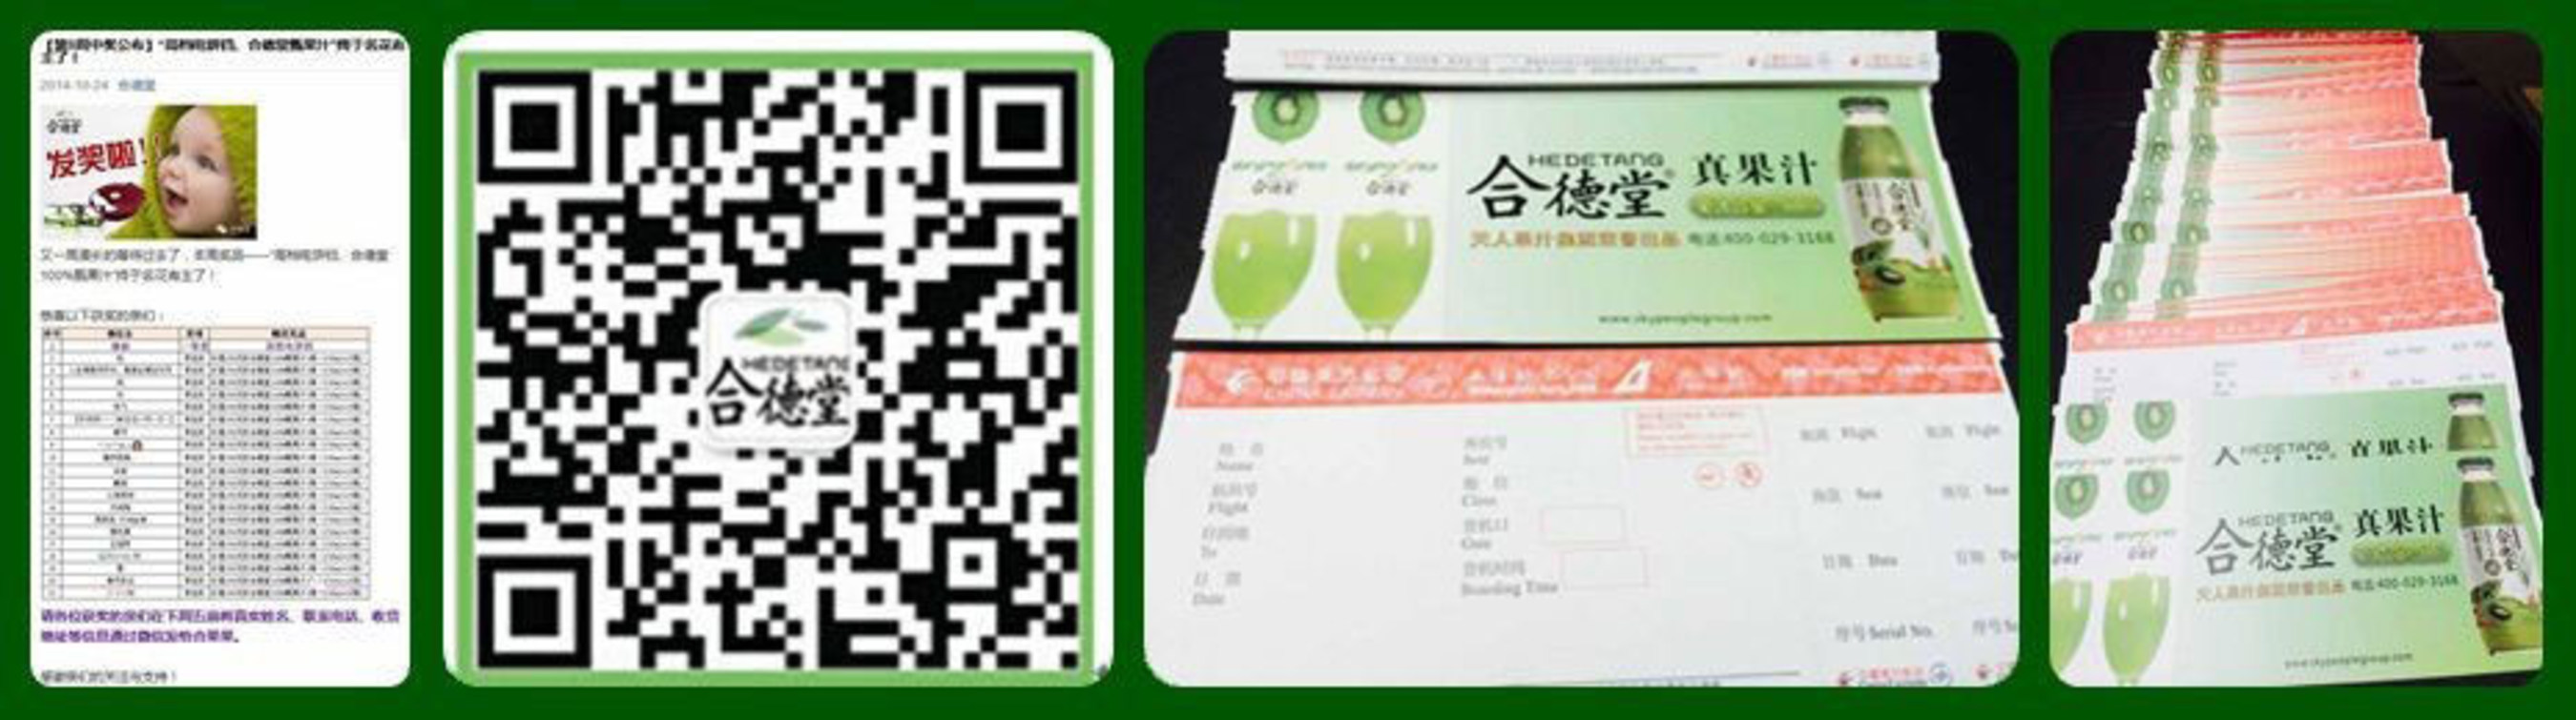 Boarding Pass and List of WeChat Winners